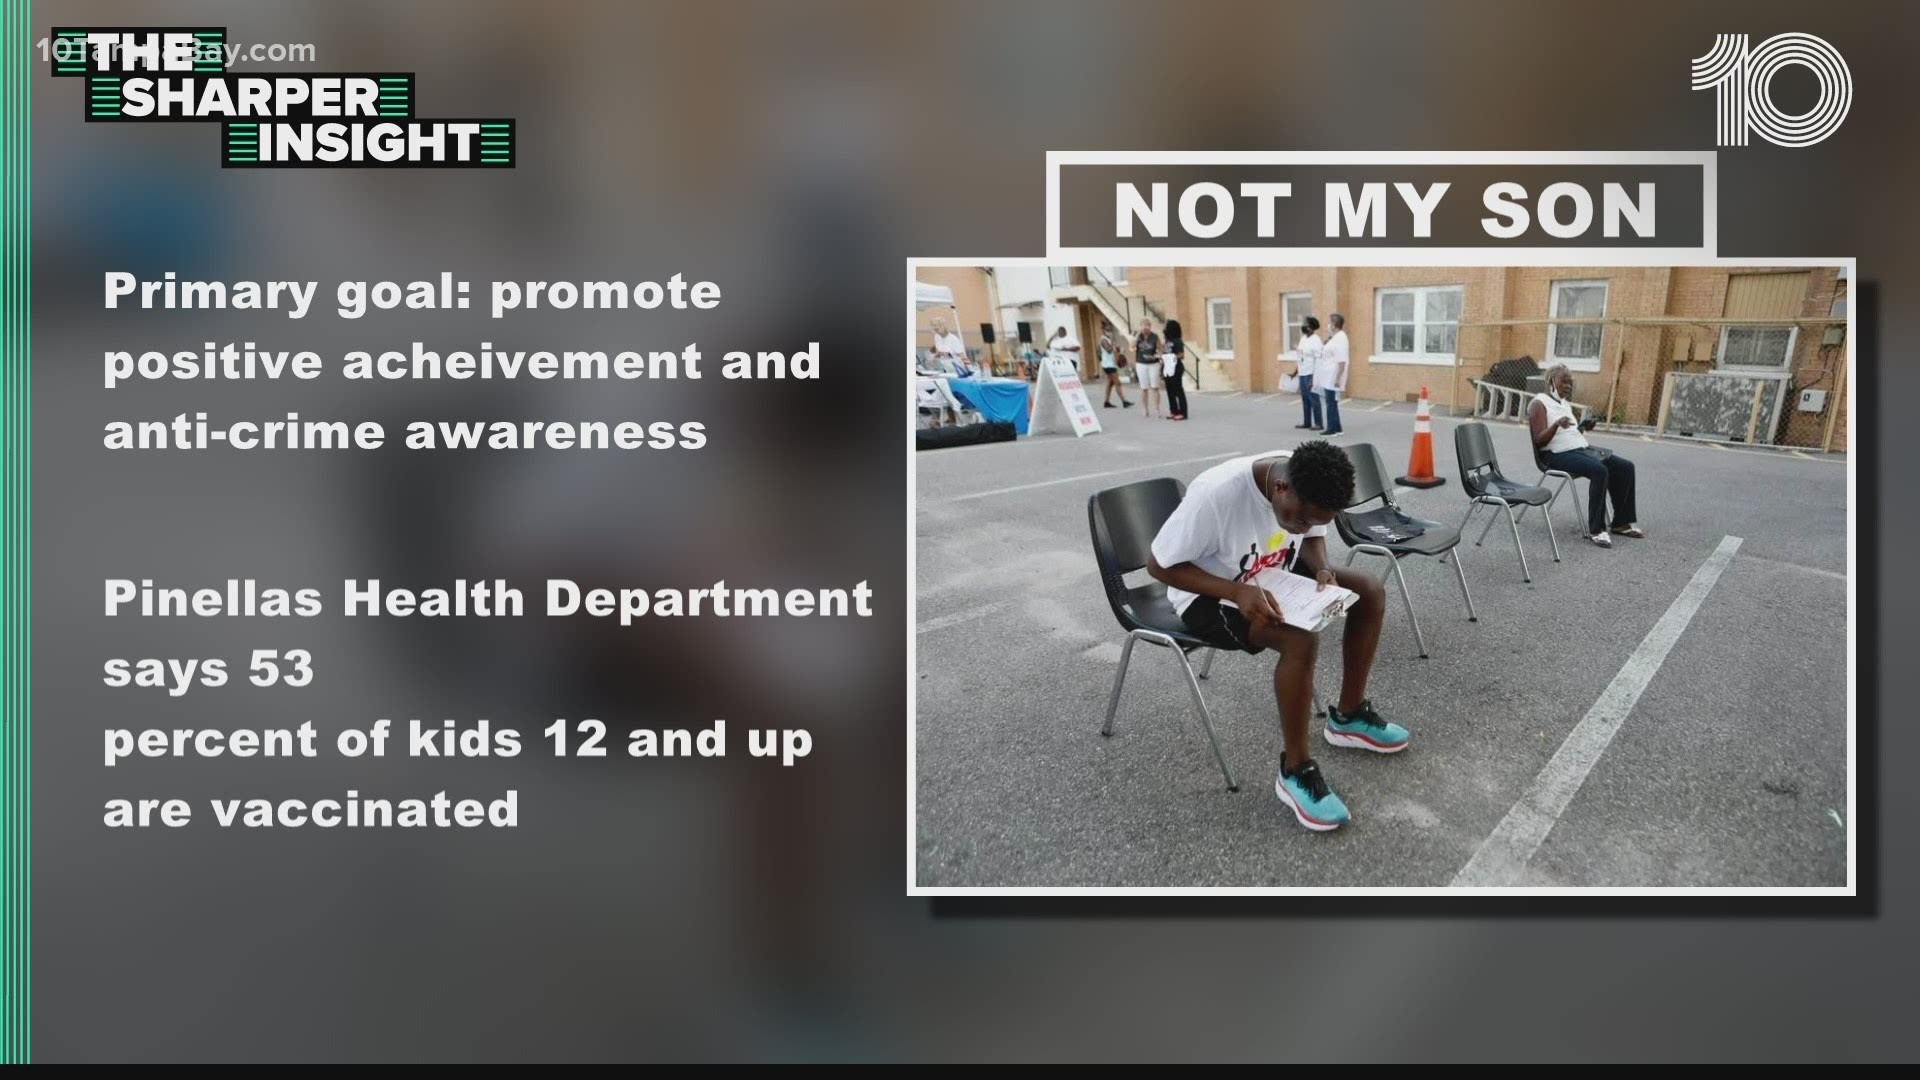 The Florida Department of Health in Pinellas County will meet each Friday in August with the grassroots community outreach program "Not My Son" in St. Pete.